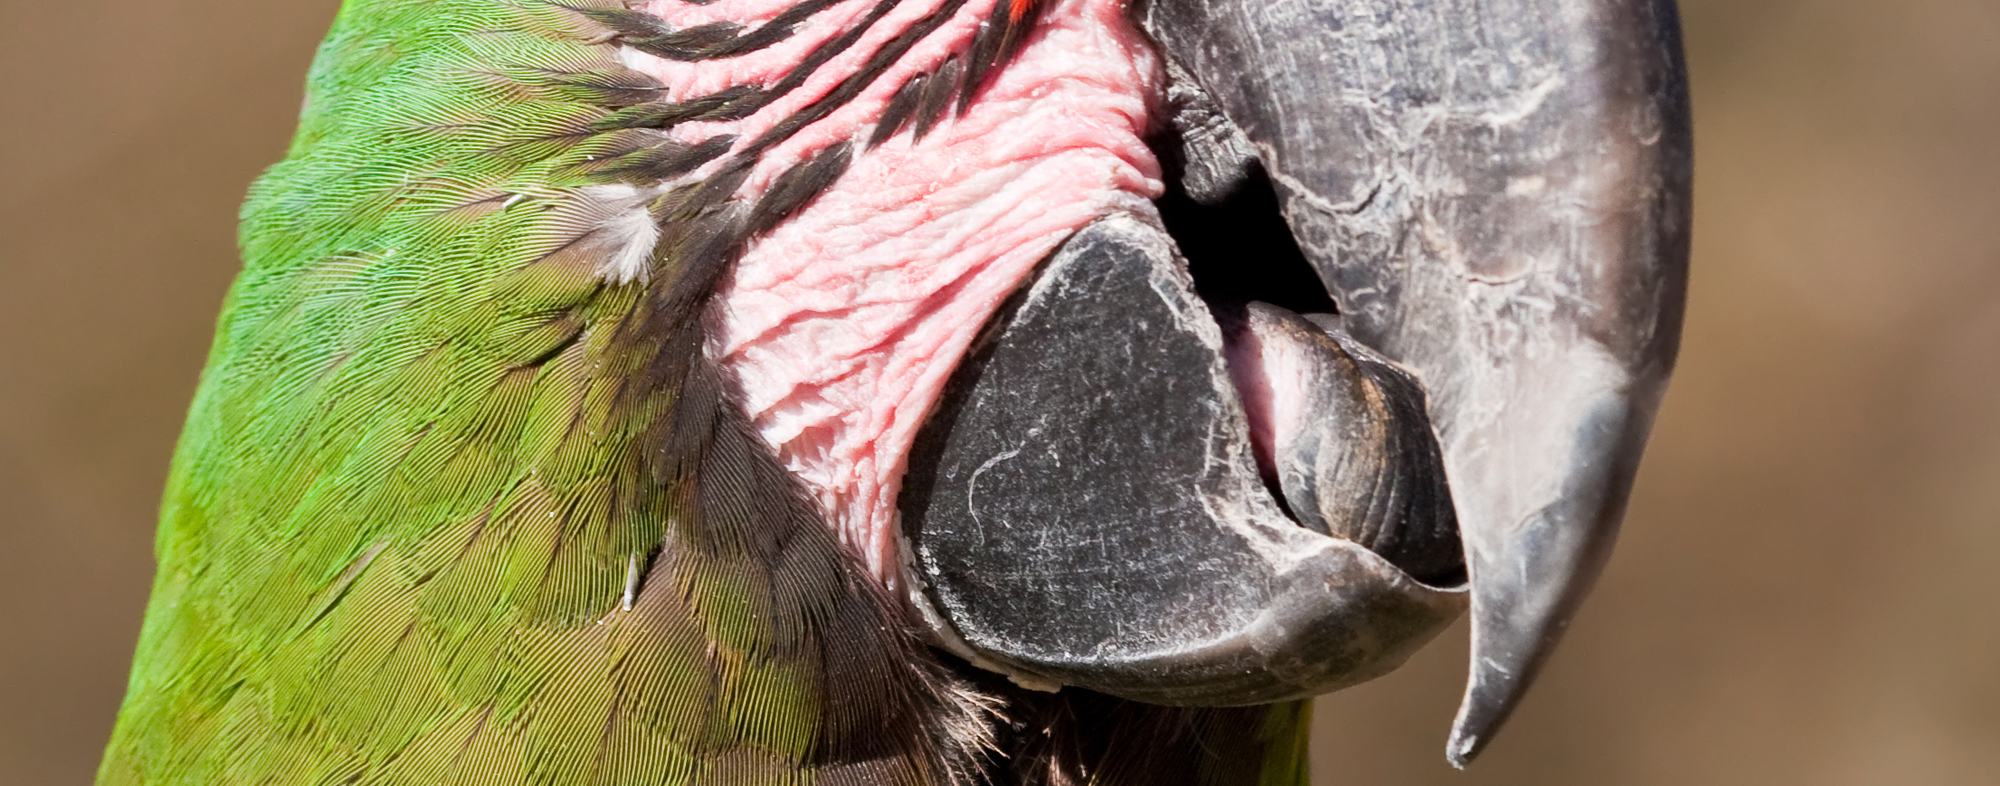 You should monitor your bird's beak for any breaks or injuries